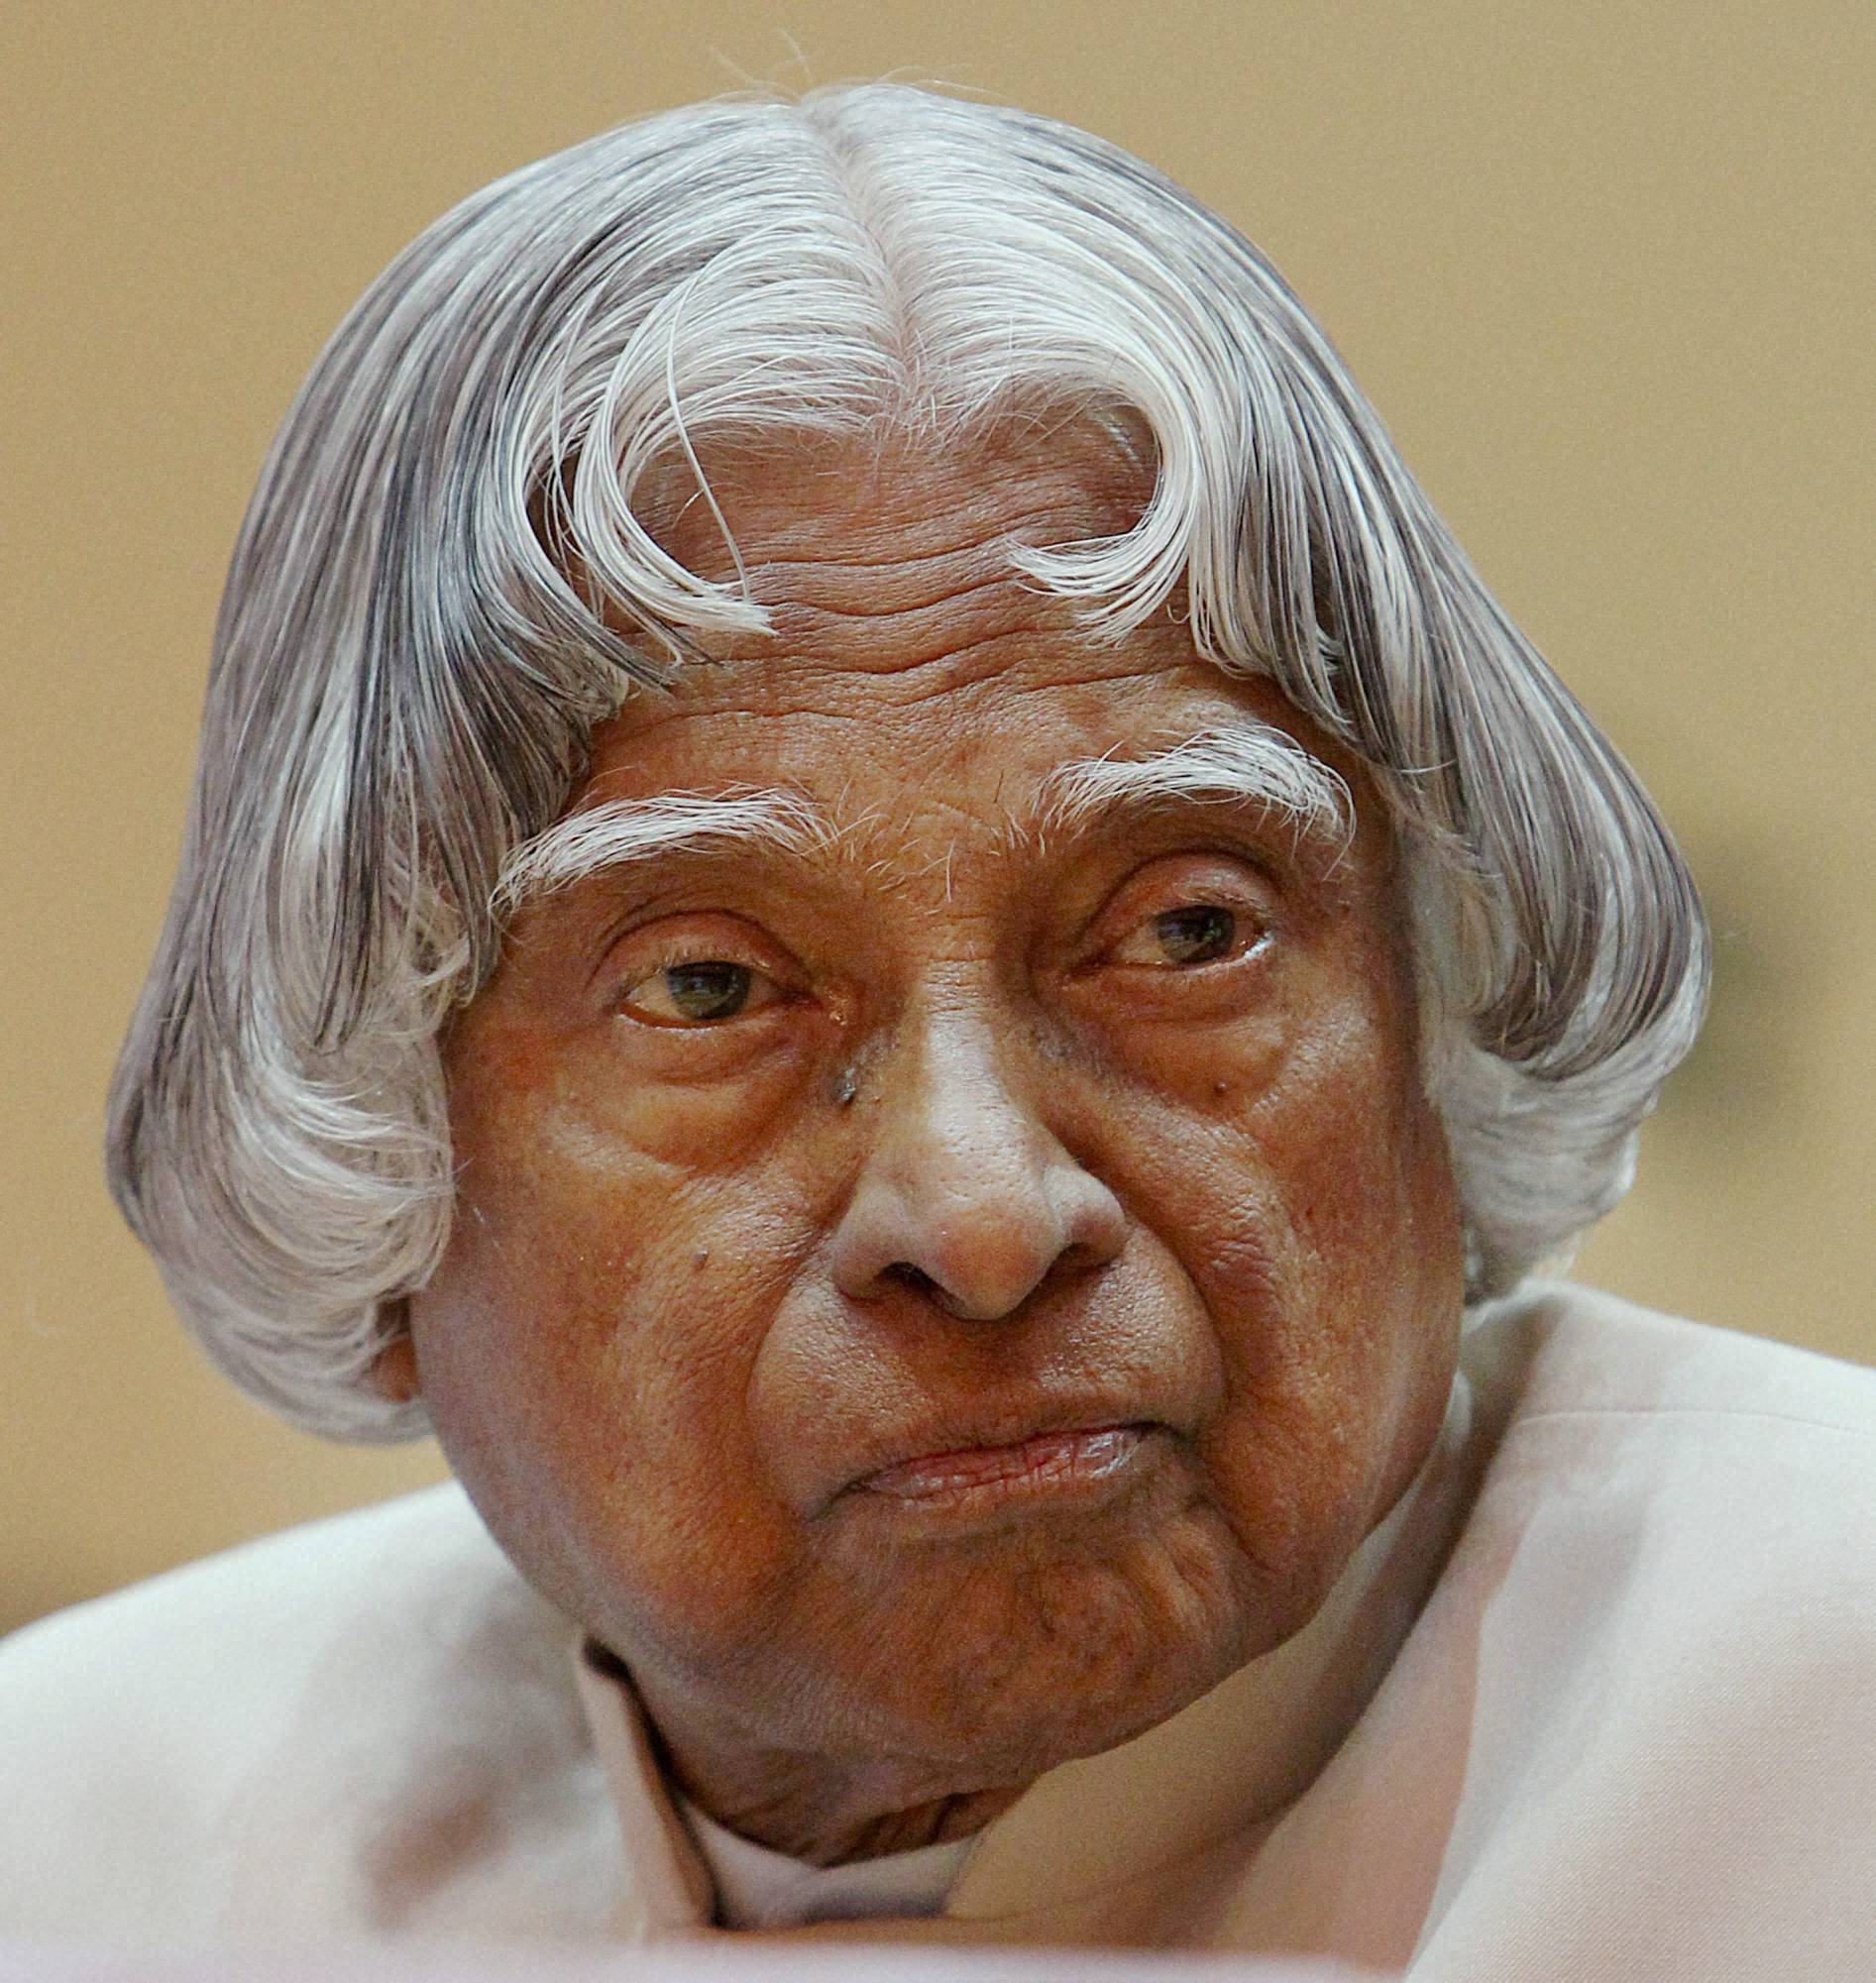 Why has Abdul Kalam's Twitter account been deactivated?